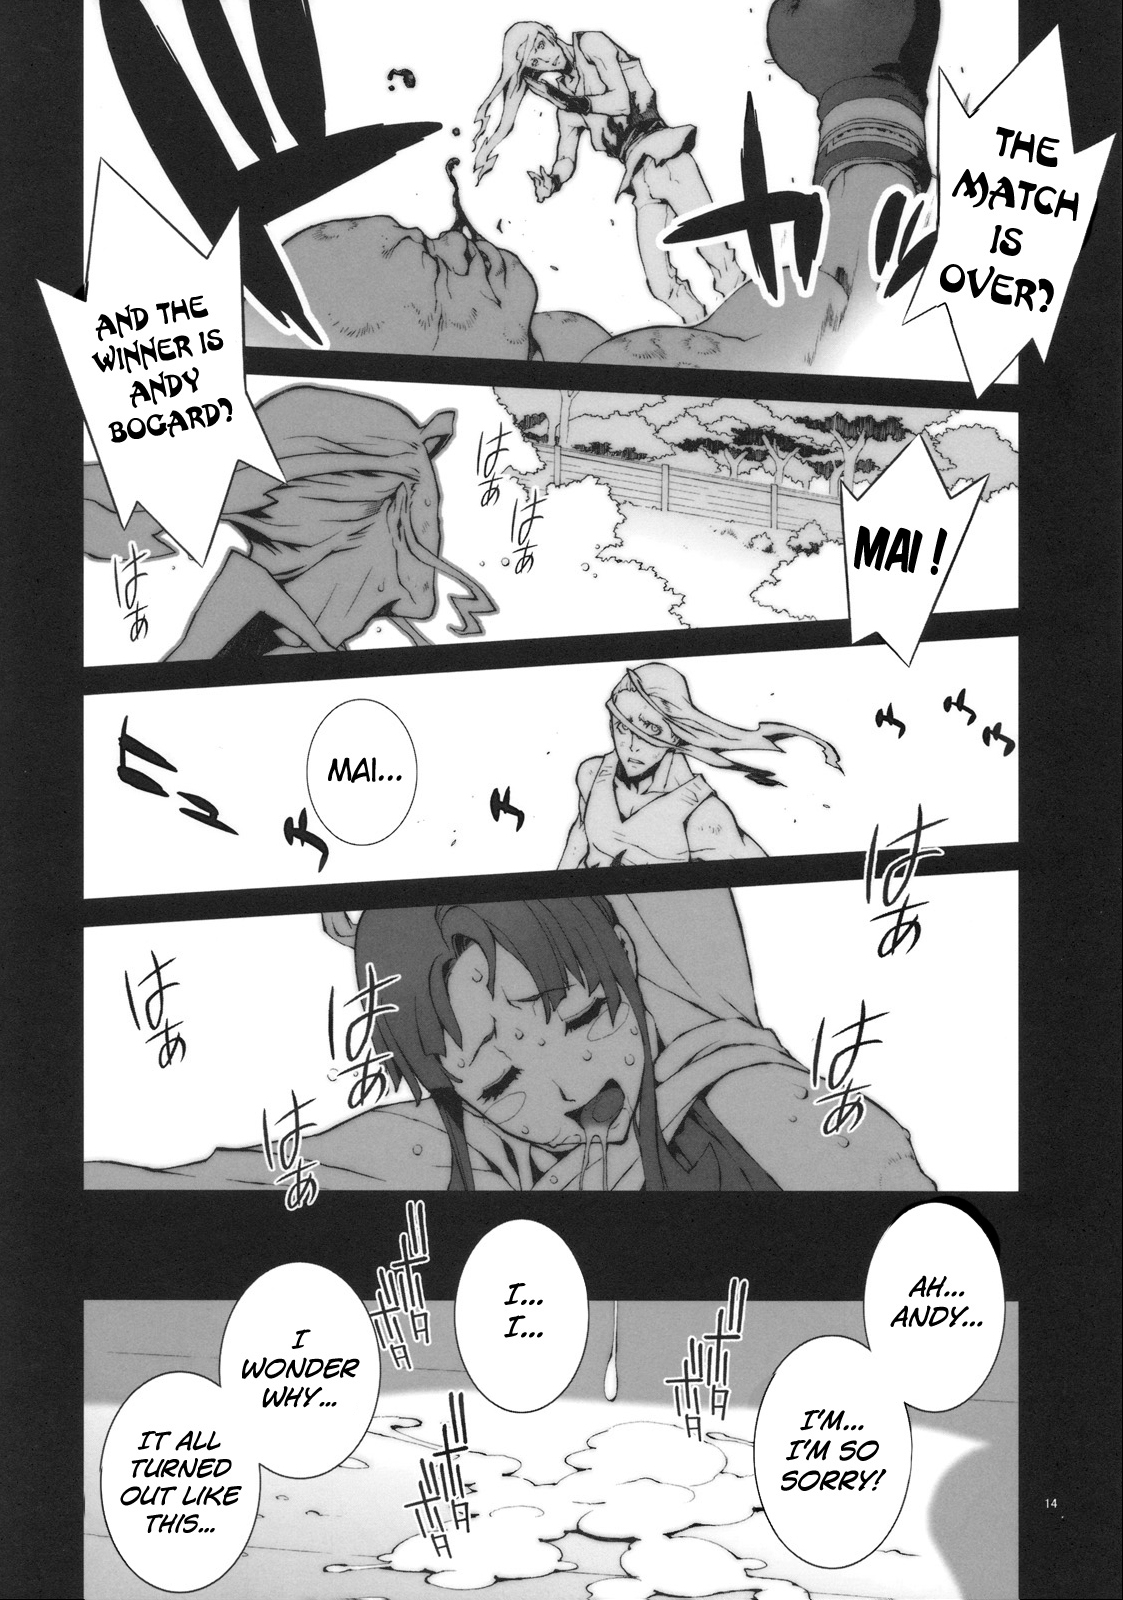 (COMIC1☆4) [P-collection (Nori-Haru)] Kachousen (King of Fighters) [English] [Funeral of Smiles] [Decensored] page 15 full